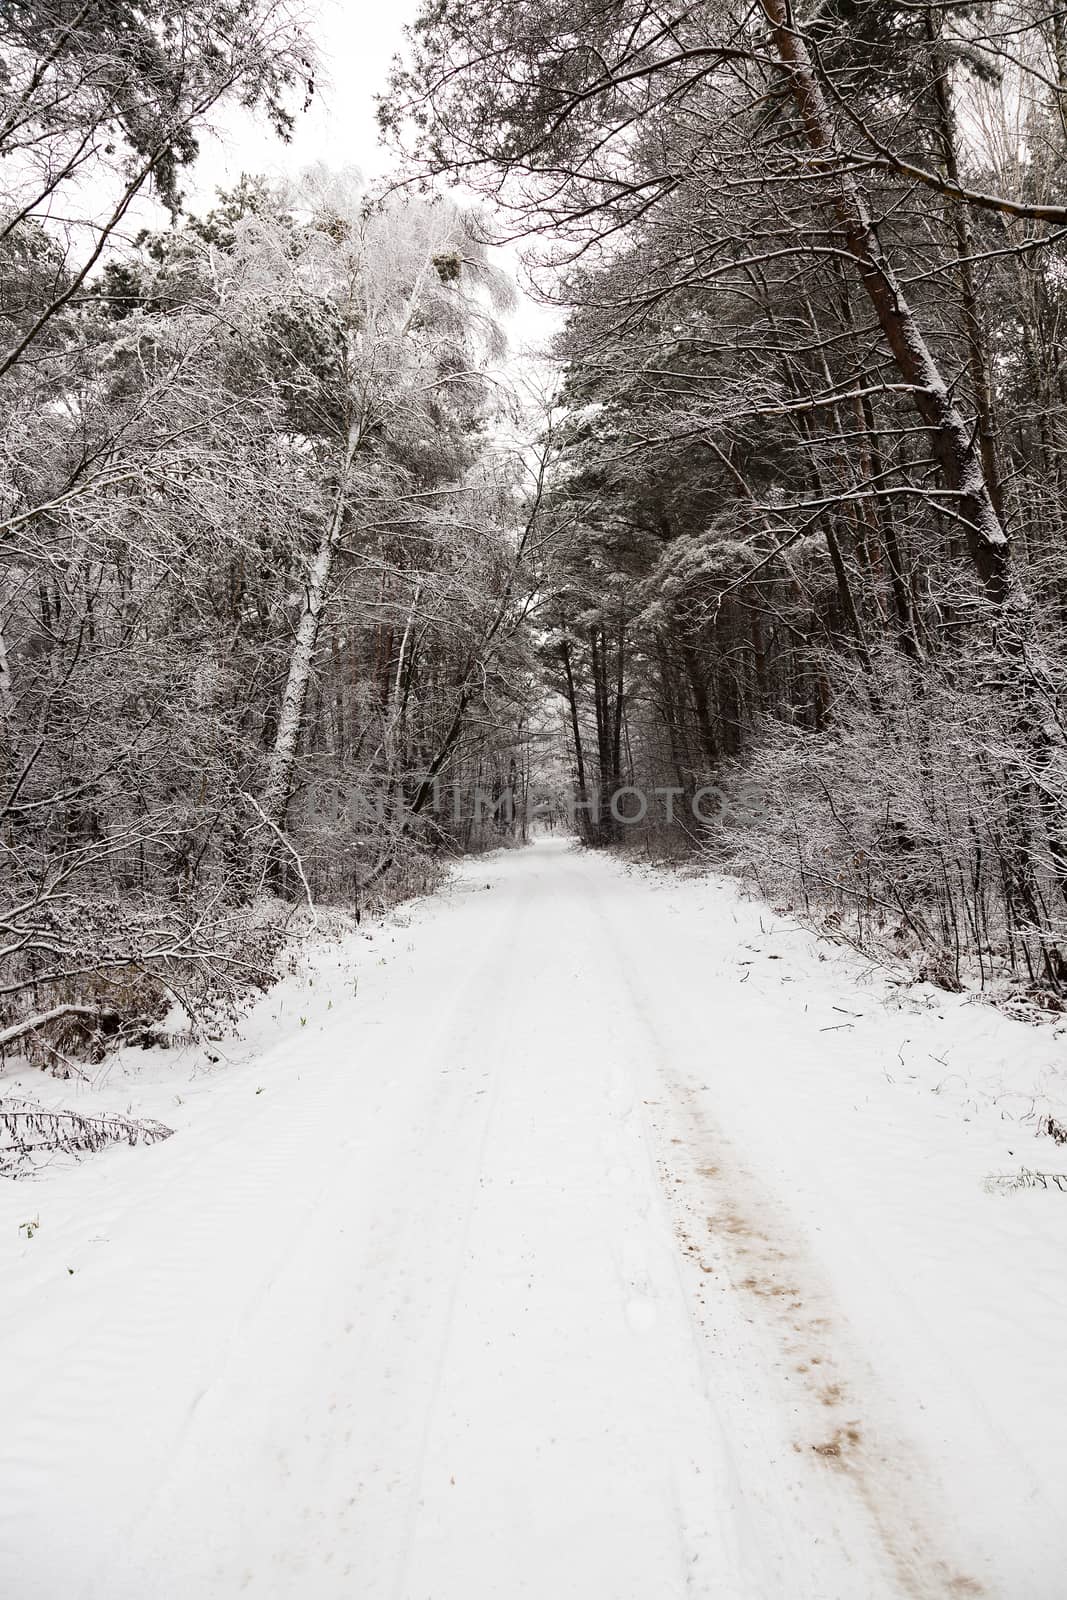   the small road photographed in a winter season